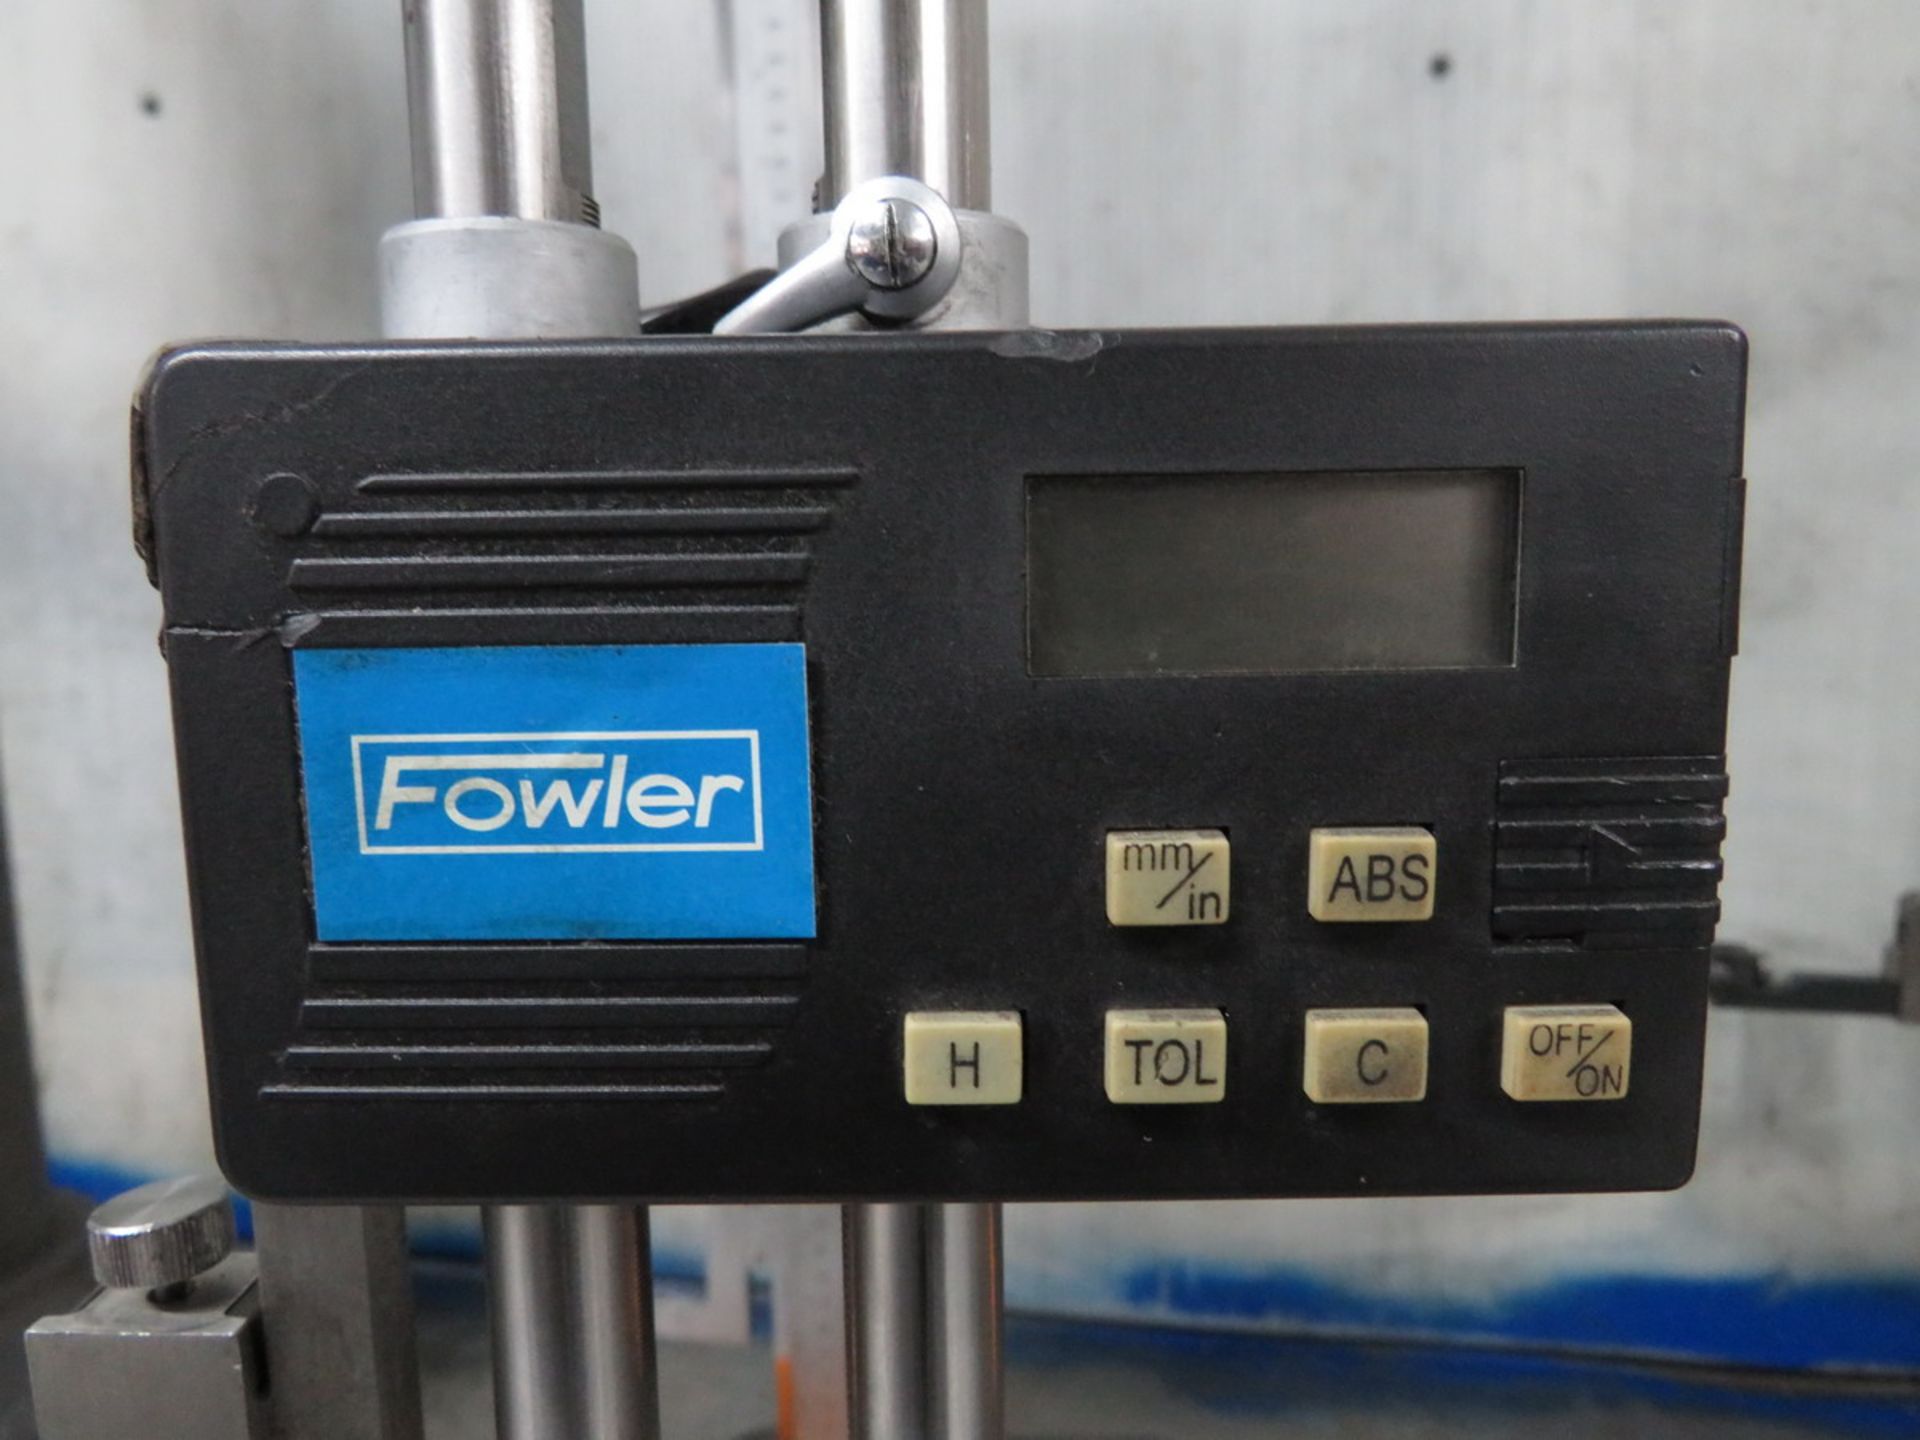 Fowler 12" Digital Height Gages - Image 2 of 2